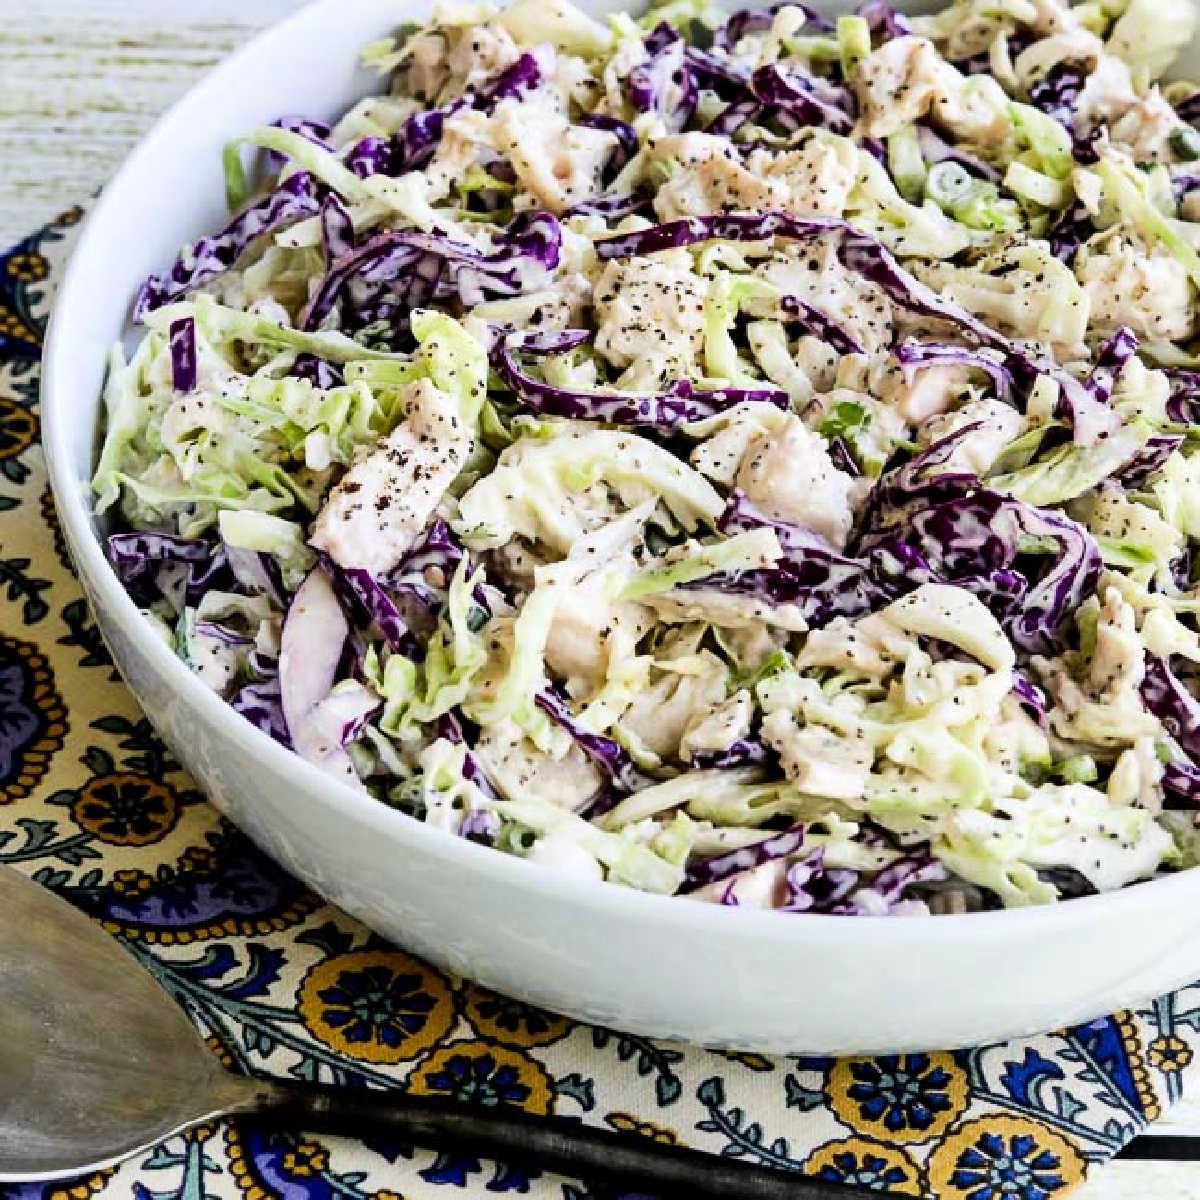 Square image of Chicken Cabbage Salad with Mustard shown on napkin.